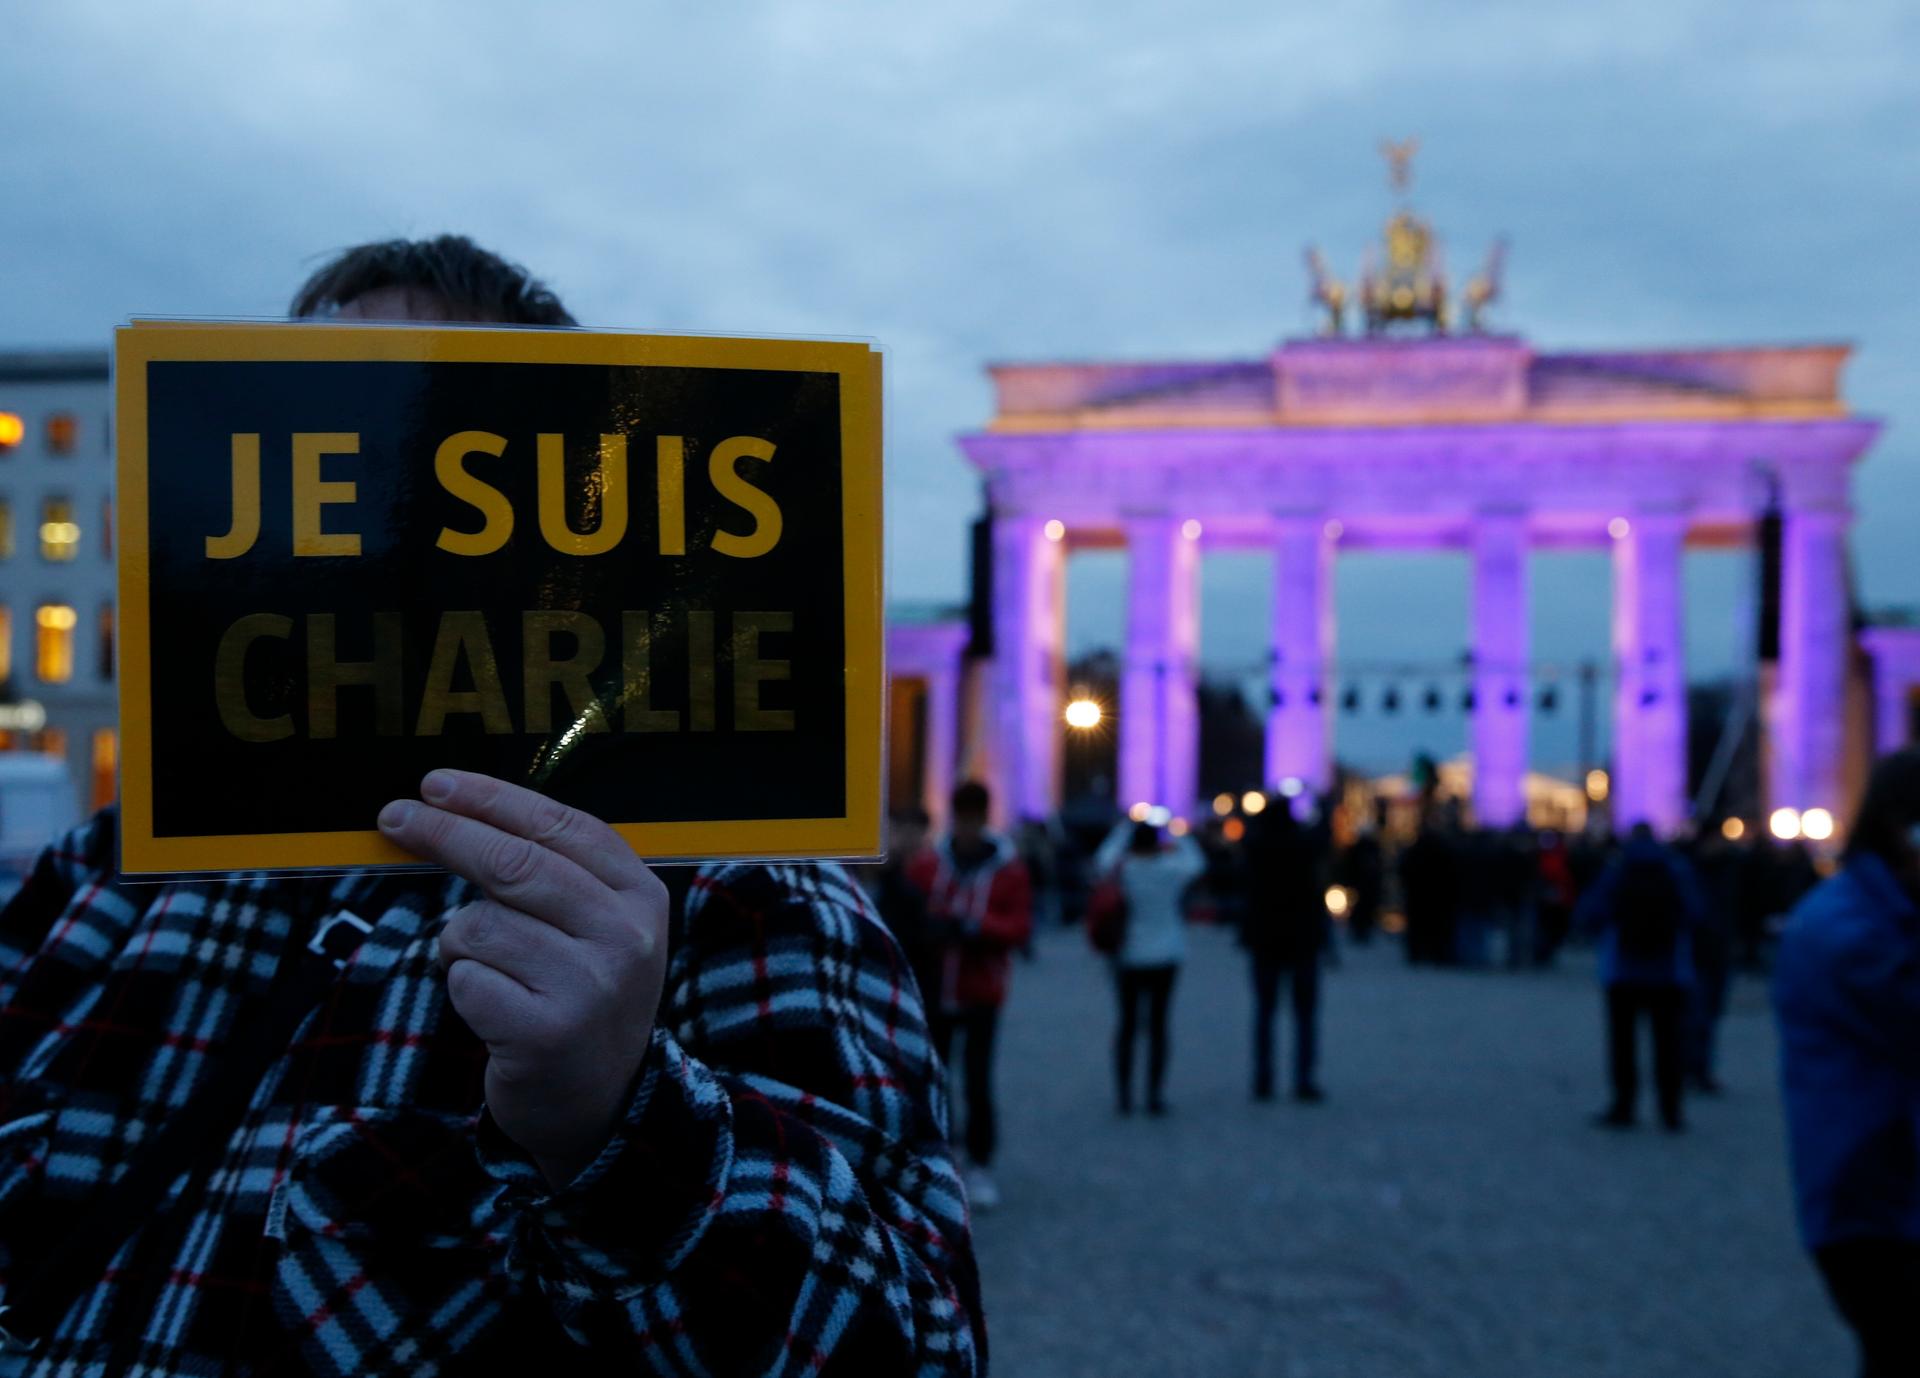 A placard is waved at a demonstration in Berlin on Tuesday night organized by Muslim groups to commemorate those killed in the French attacks.